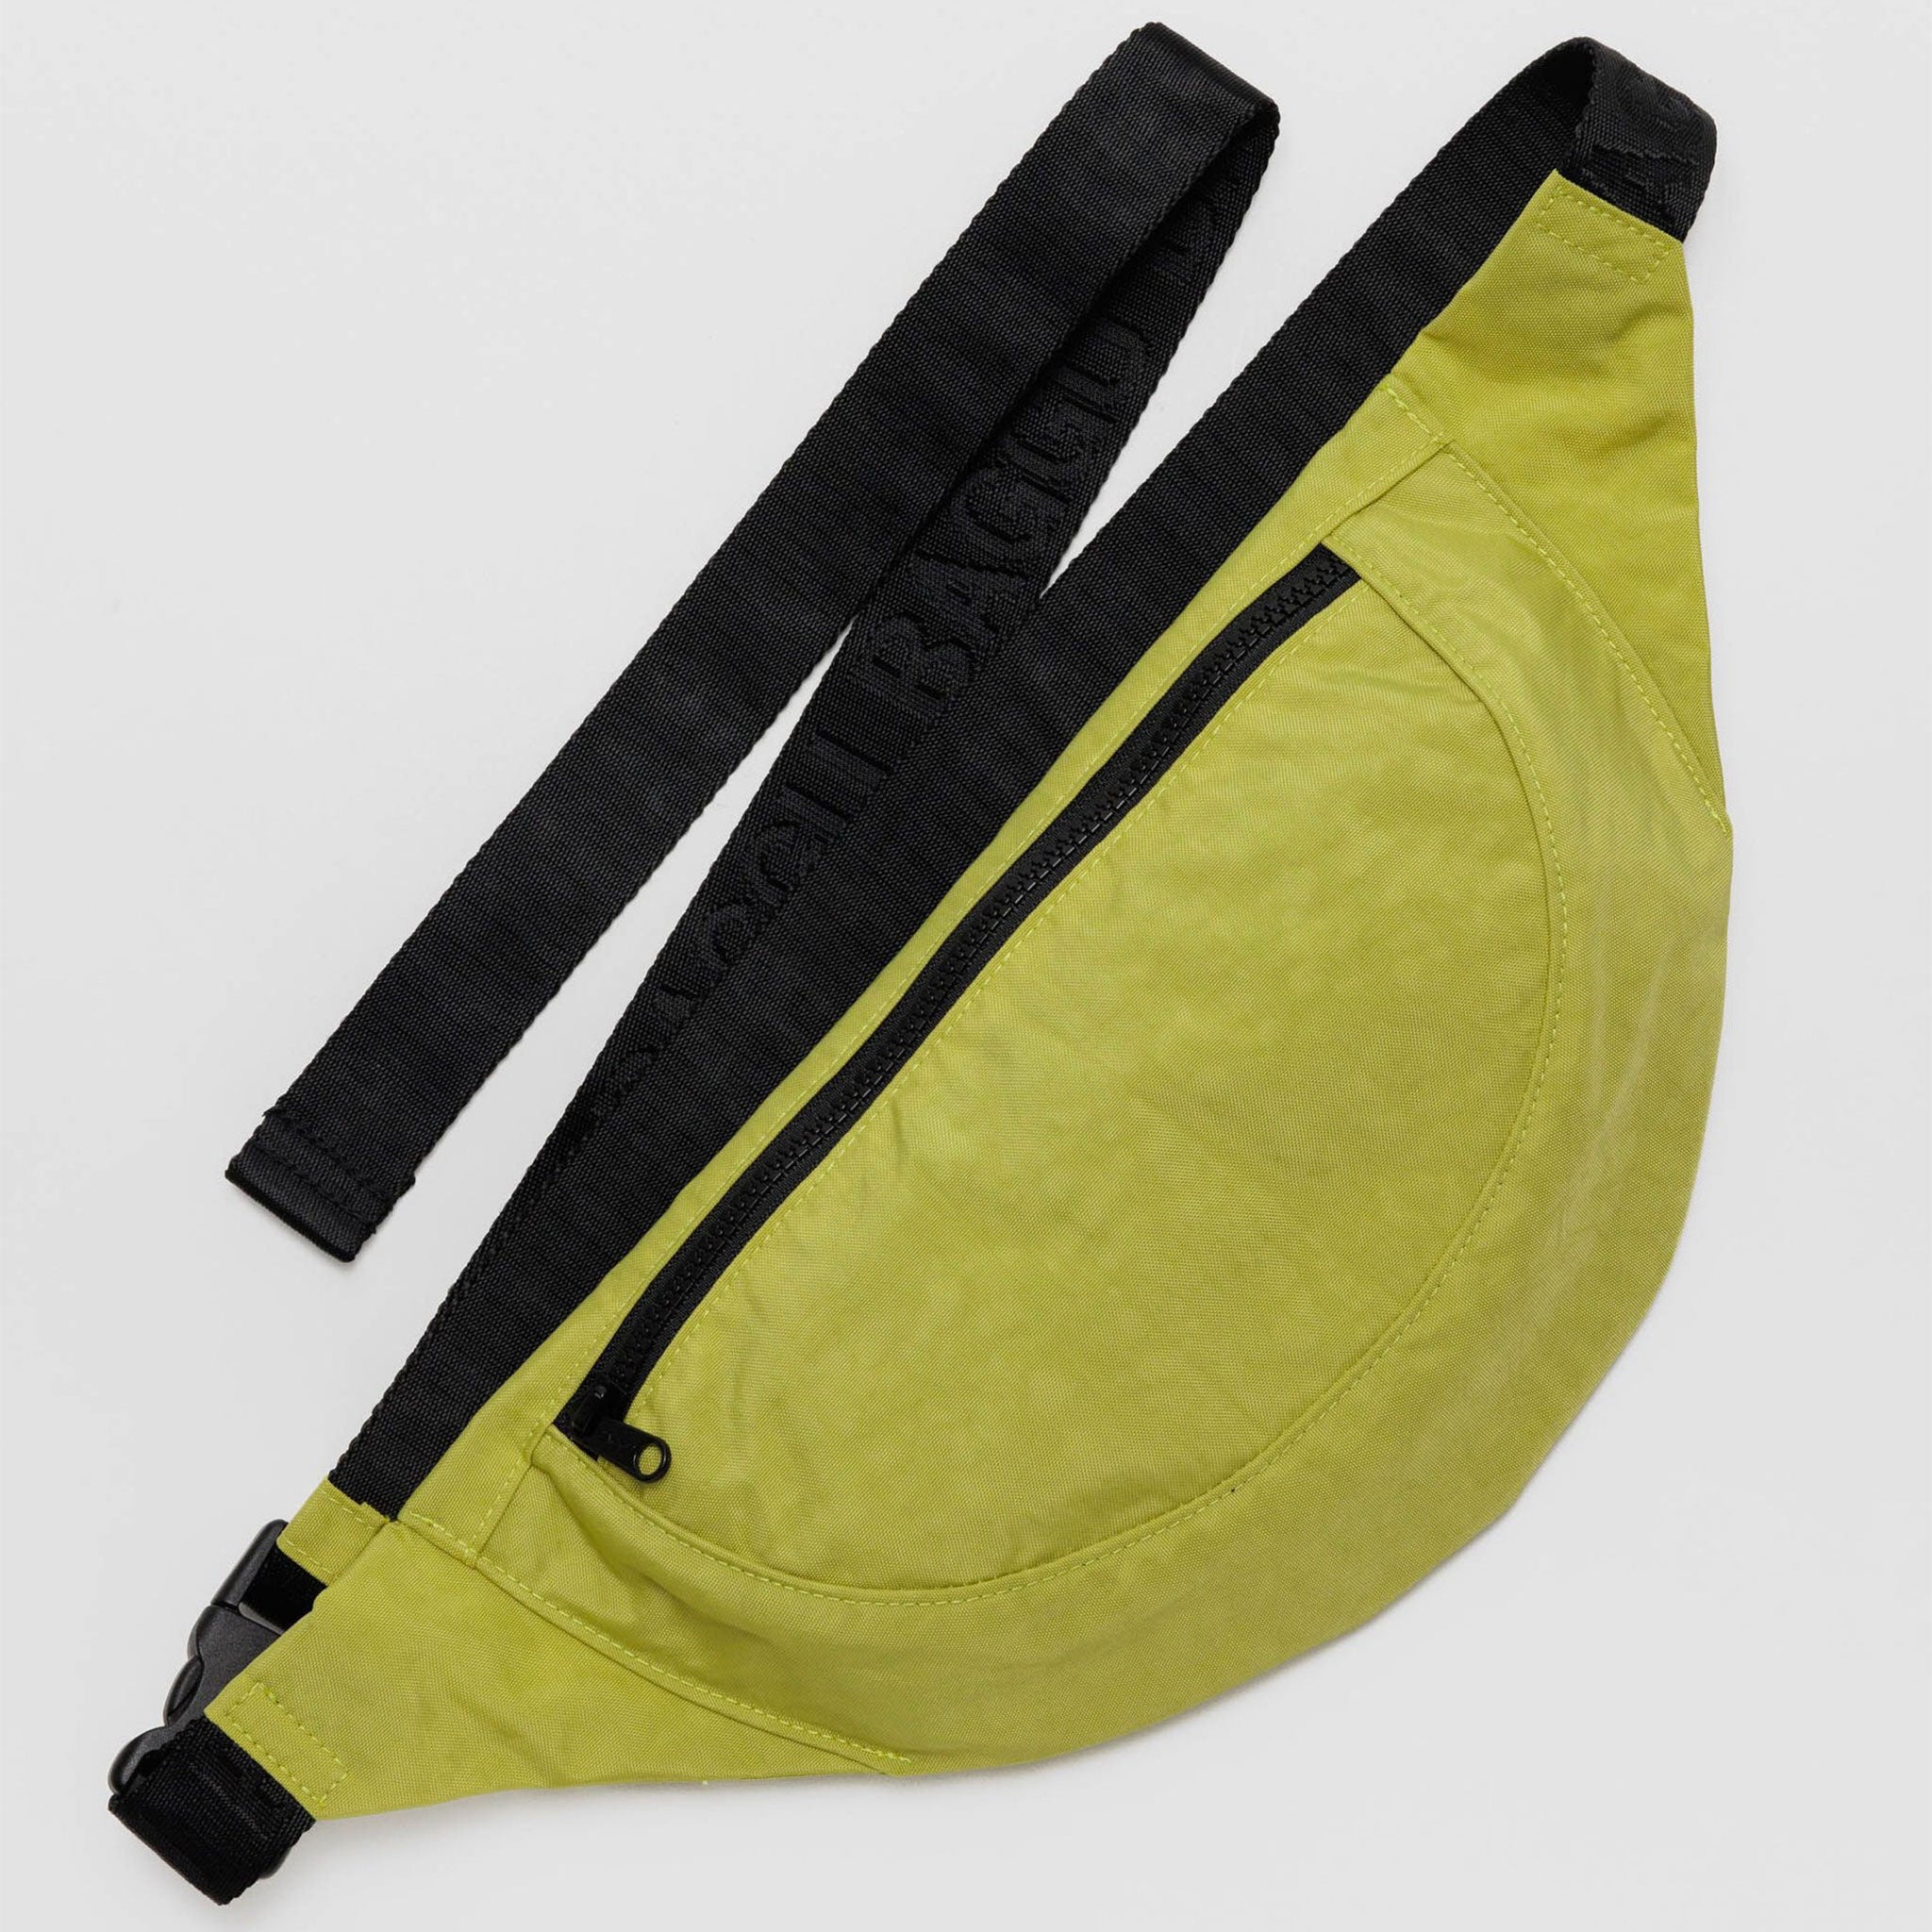 A crescent shaped fanny pack in lime green color with black strap.